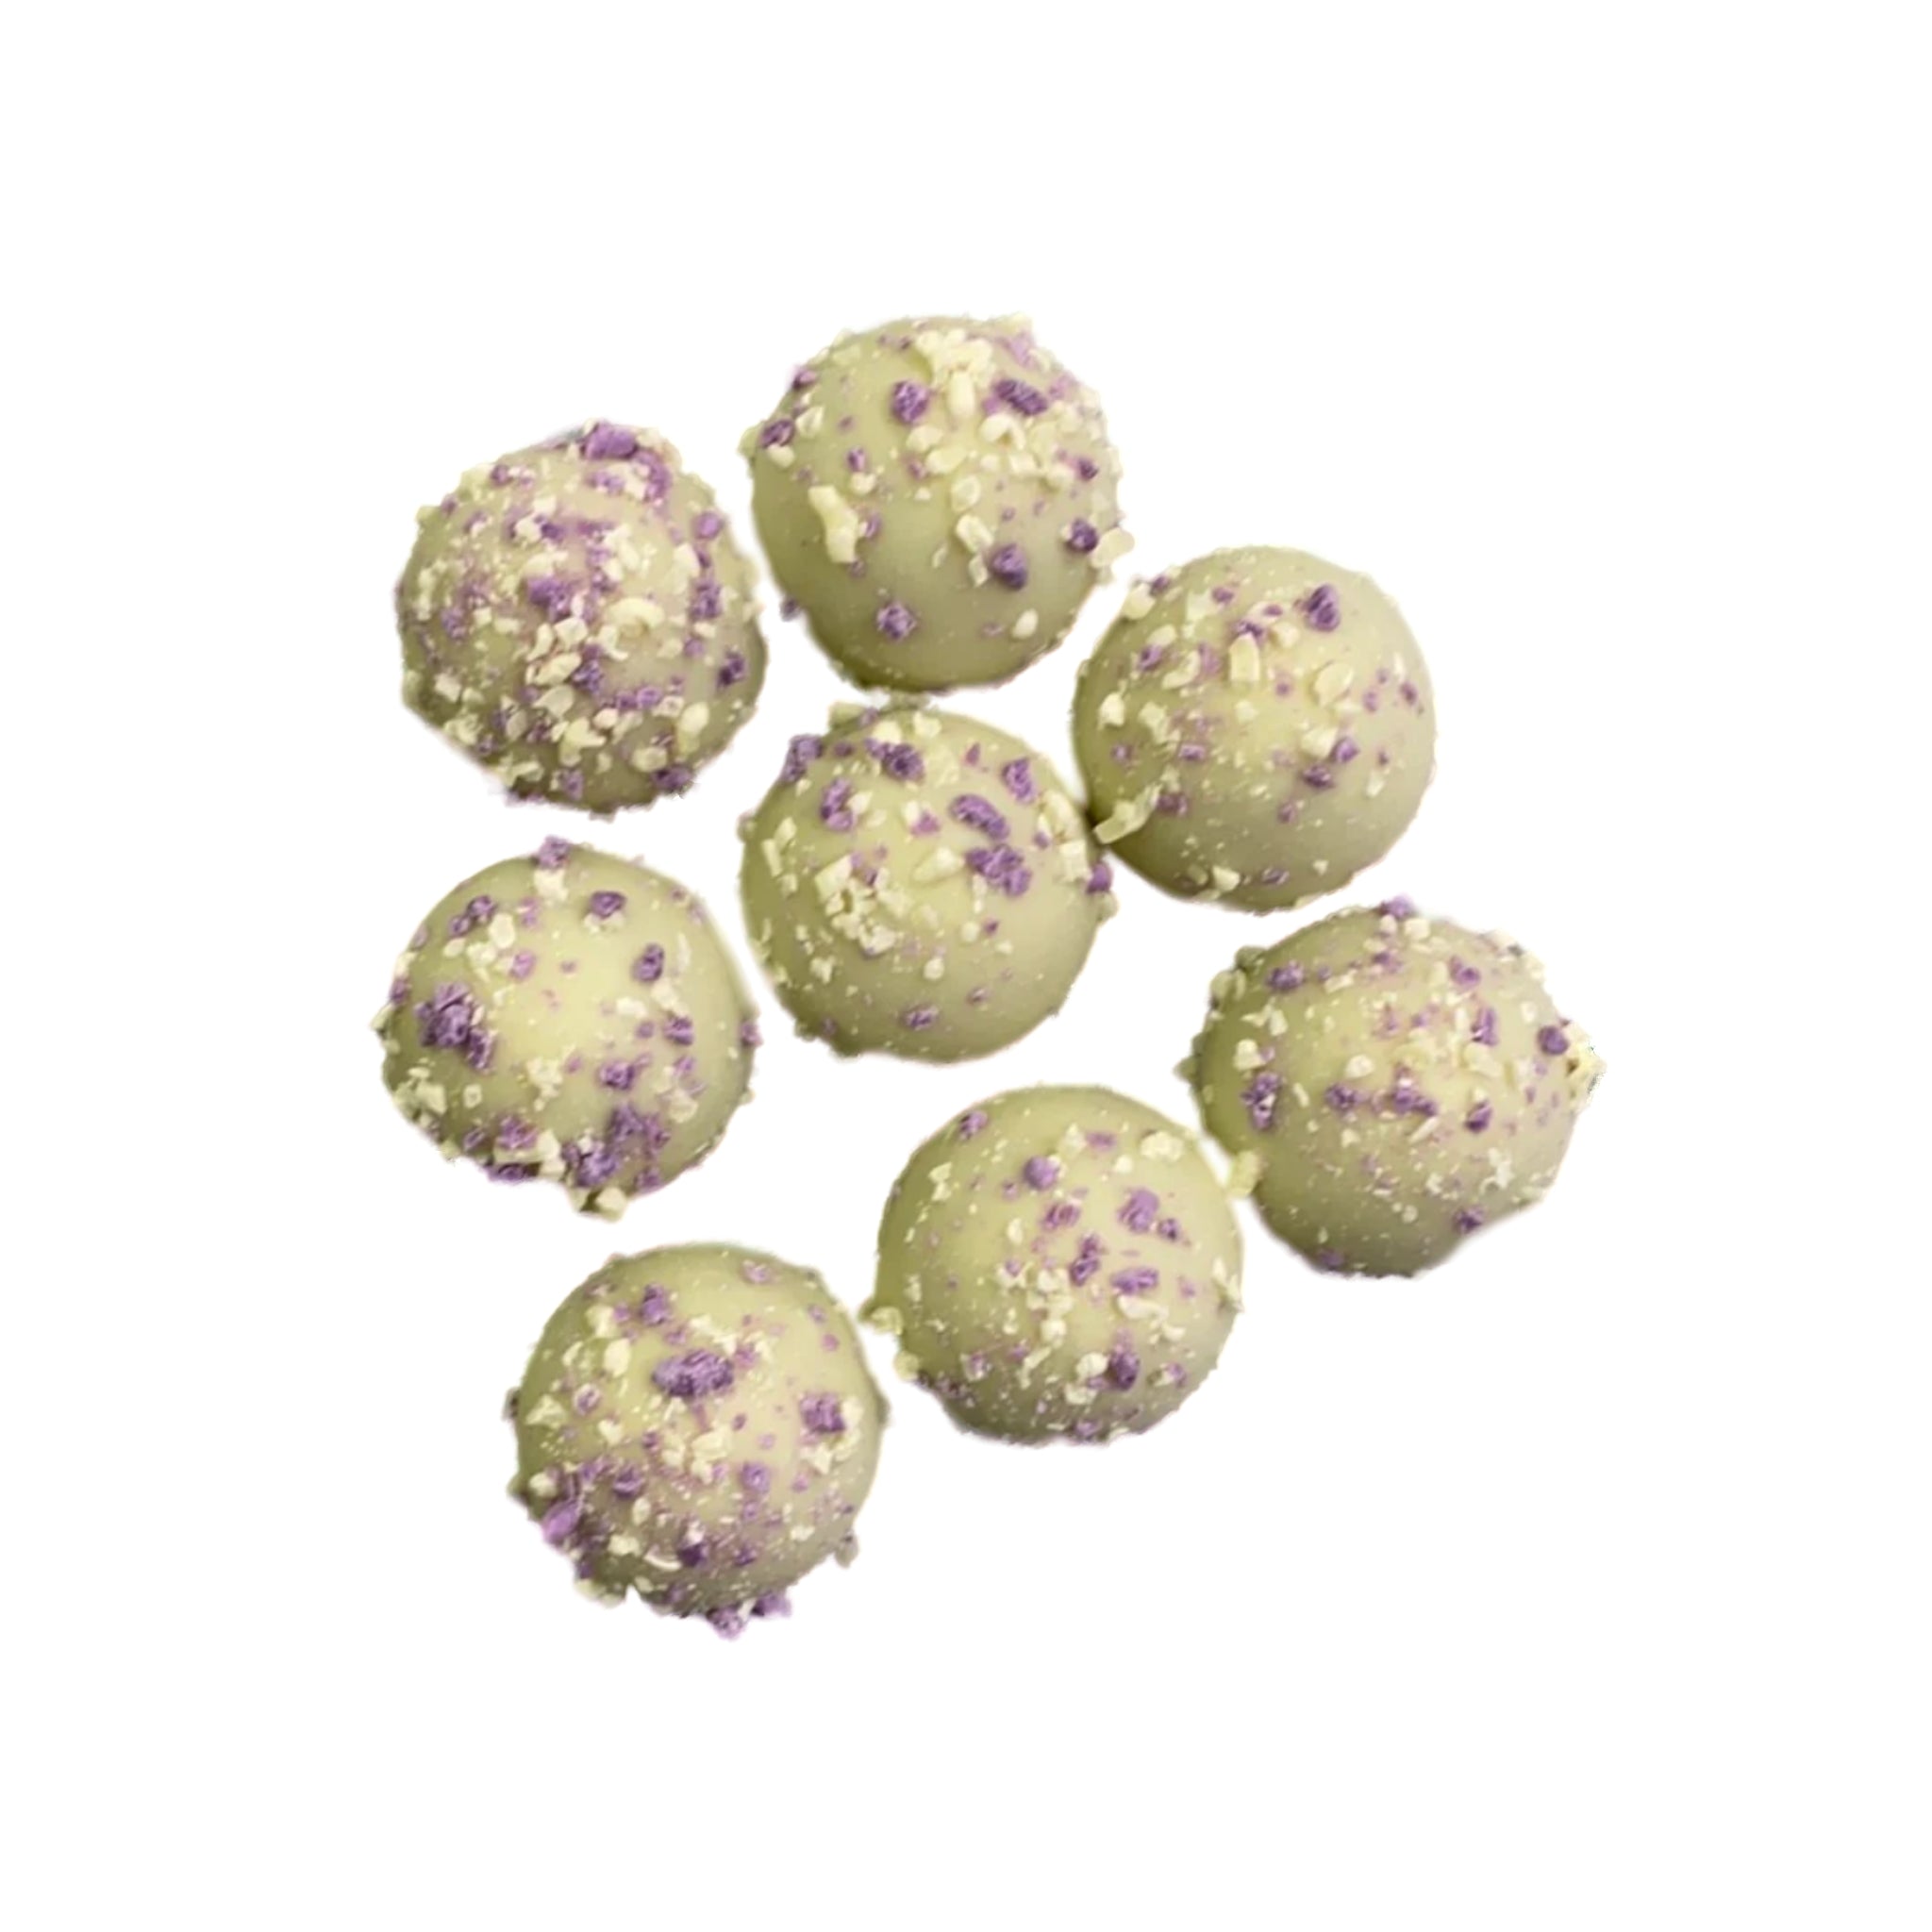 Round Marble size chocolate white with purple sprinkles 